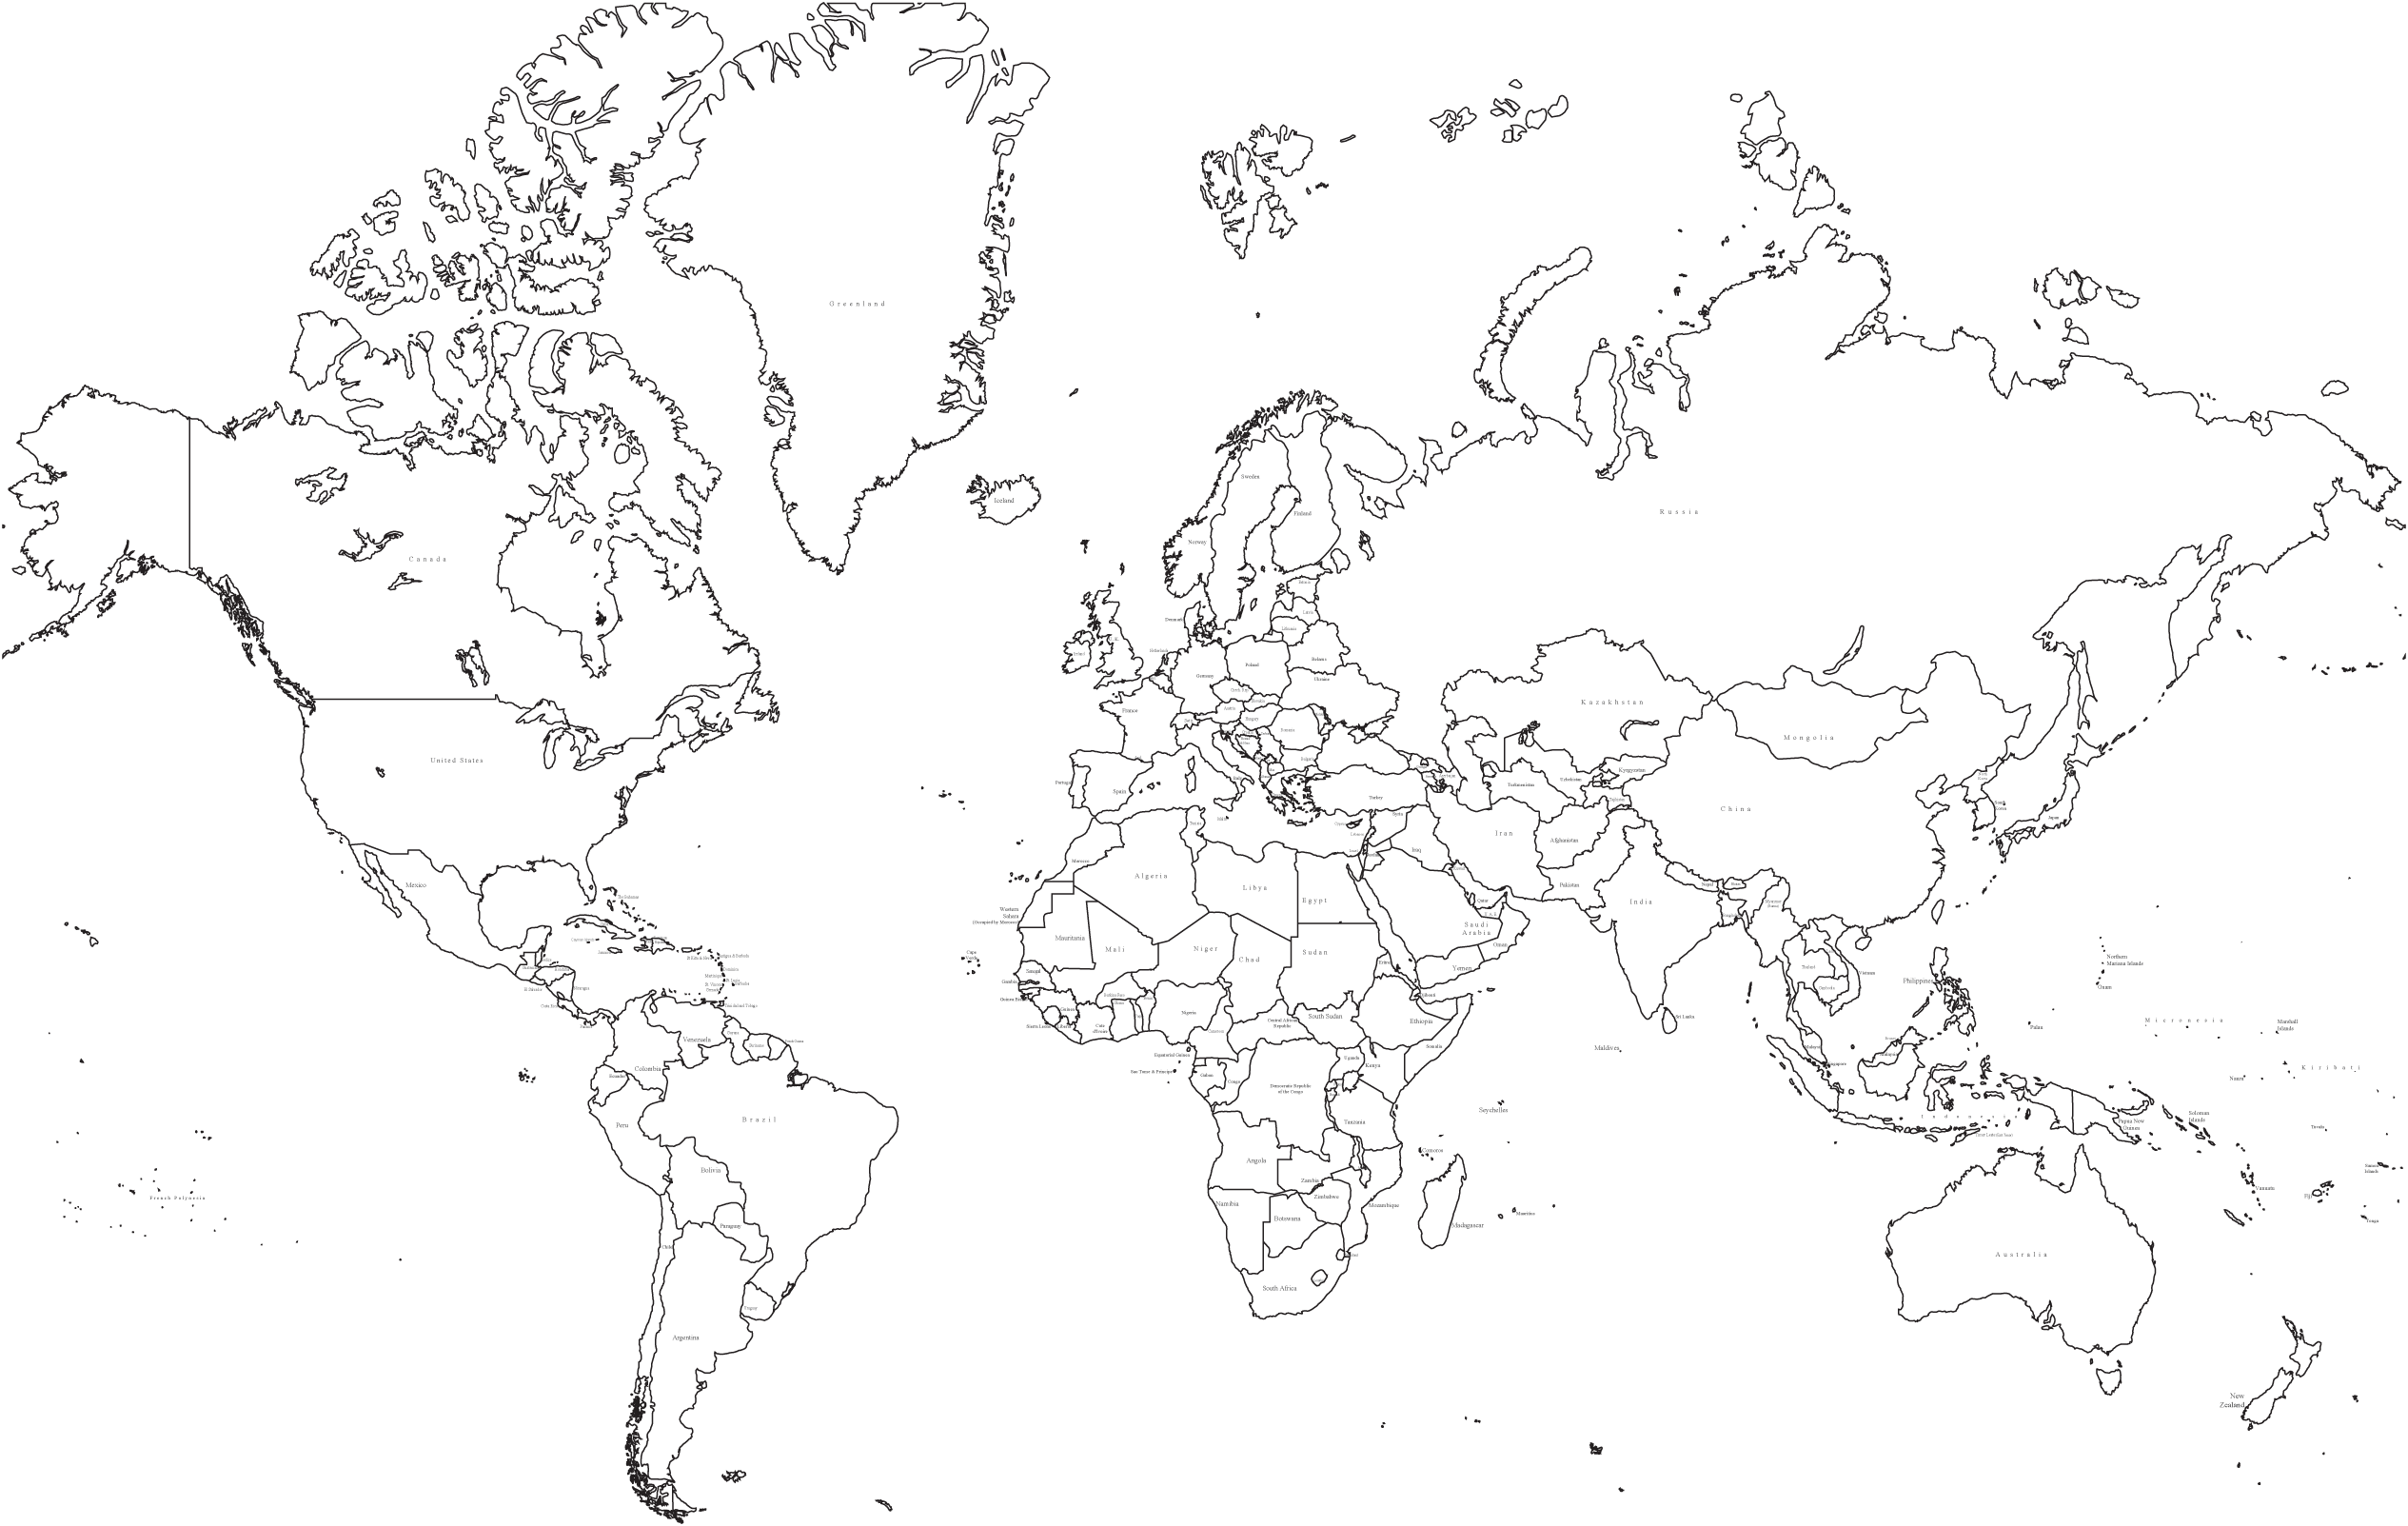 World Map Black And White Hd Wallpapers Download Free World Map Political Outline Hd Wallpaper Backgrounds Download